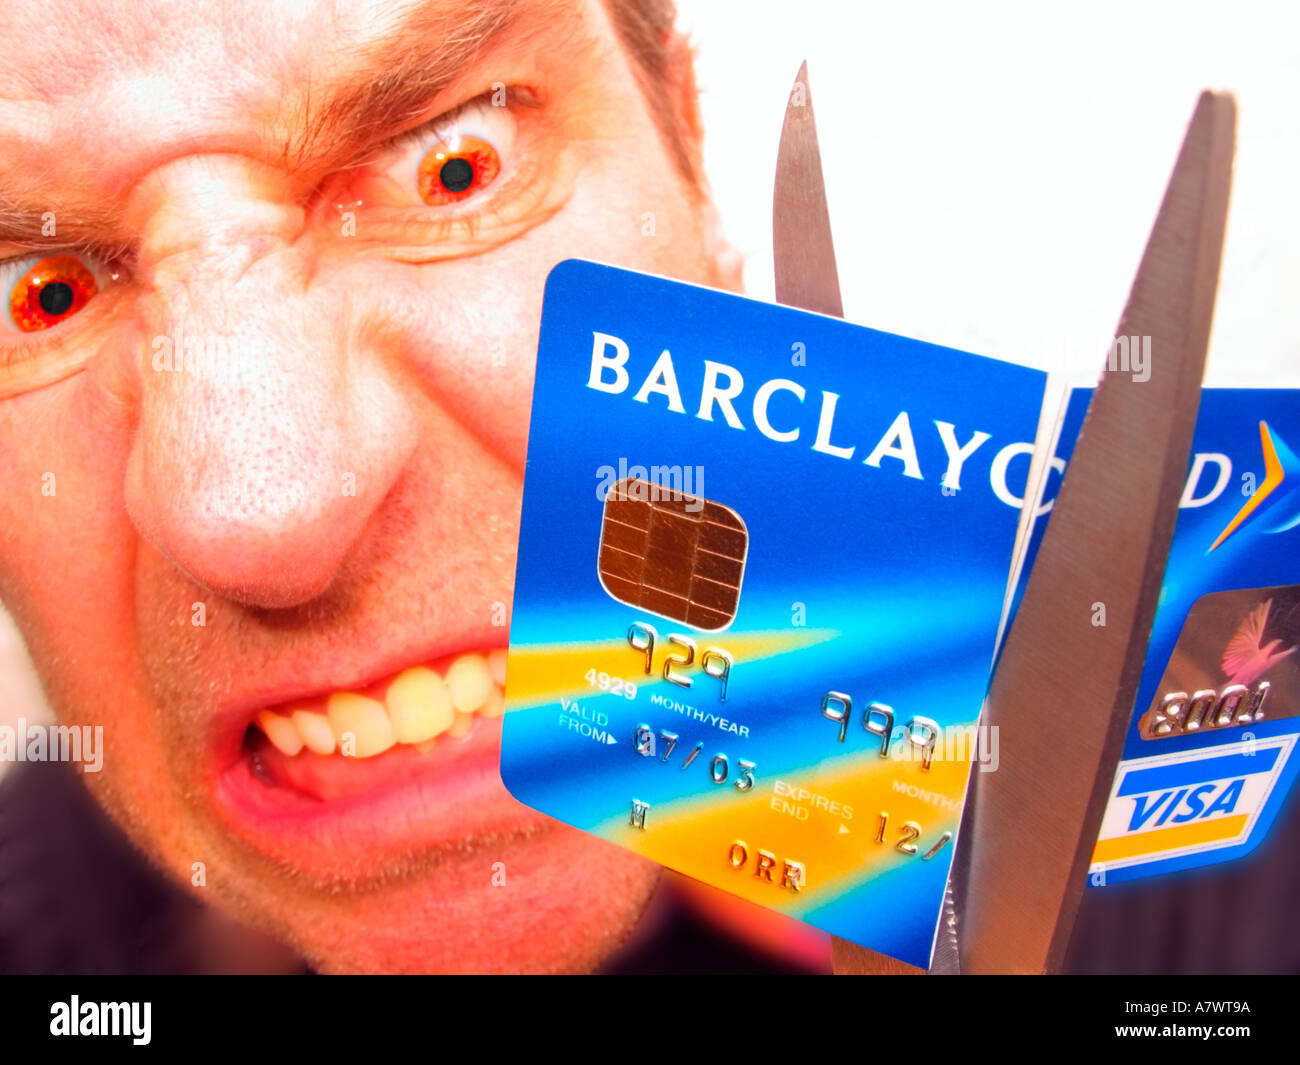 angry person cutting up credit card Stock Photo